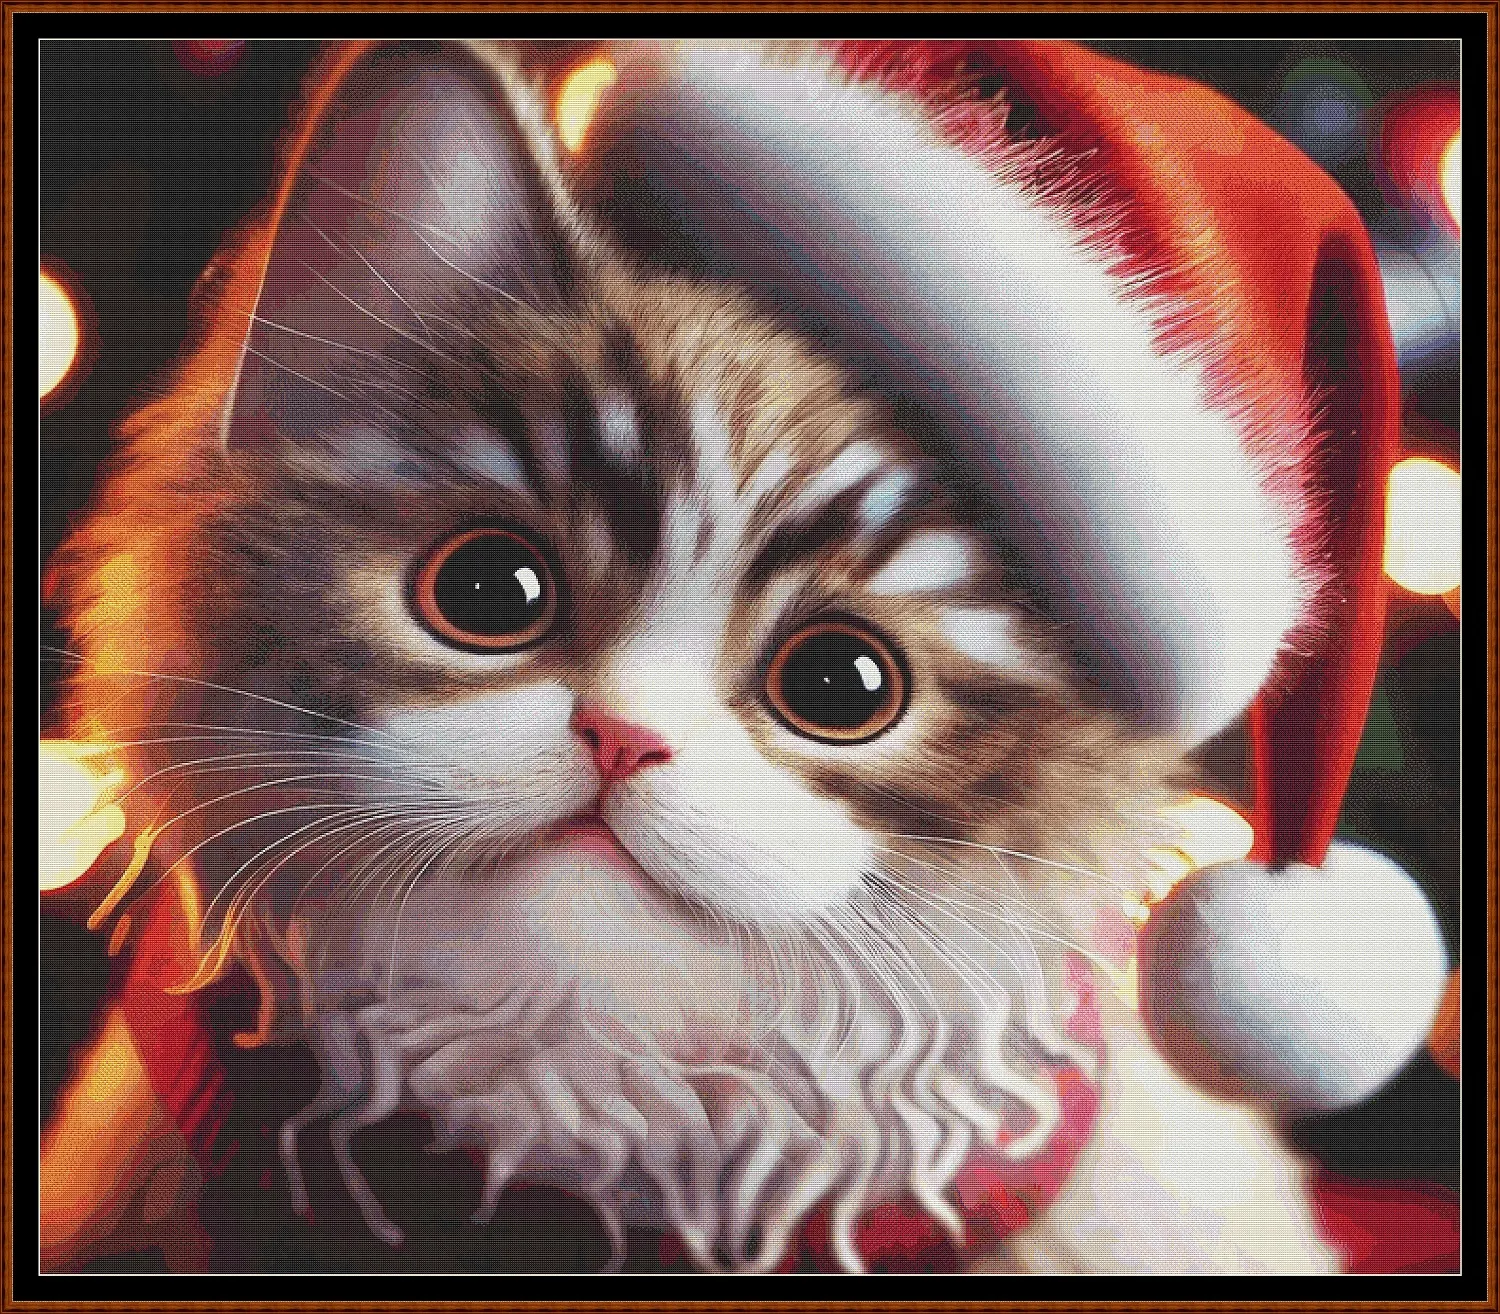 Christmas Kitty - Tabby patterns are expertly created from art by Dorothe (Darkmoon_Art) under Public Domain CC0 license Christmas Kitty - Tabby is a cute seasonal cat pattern